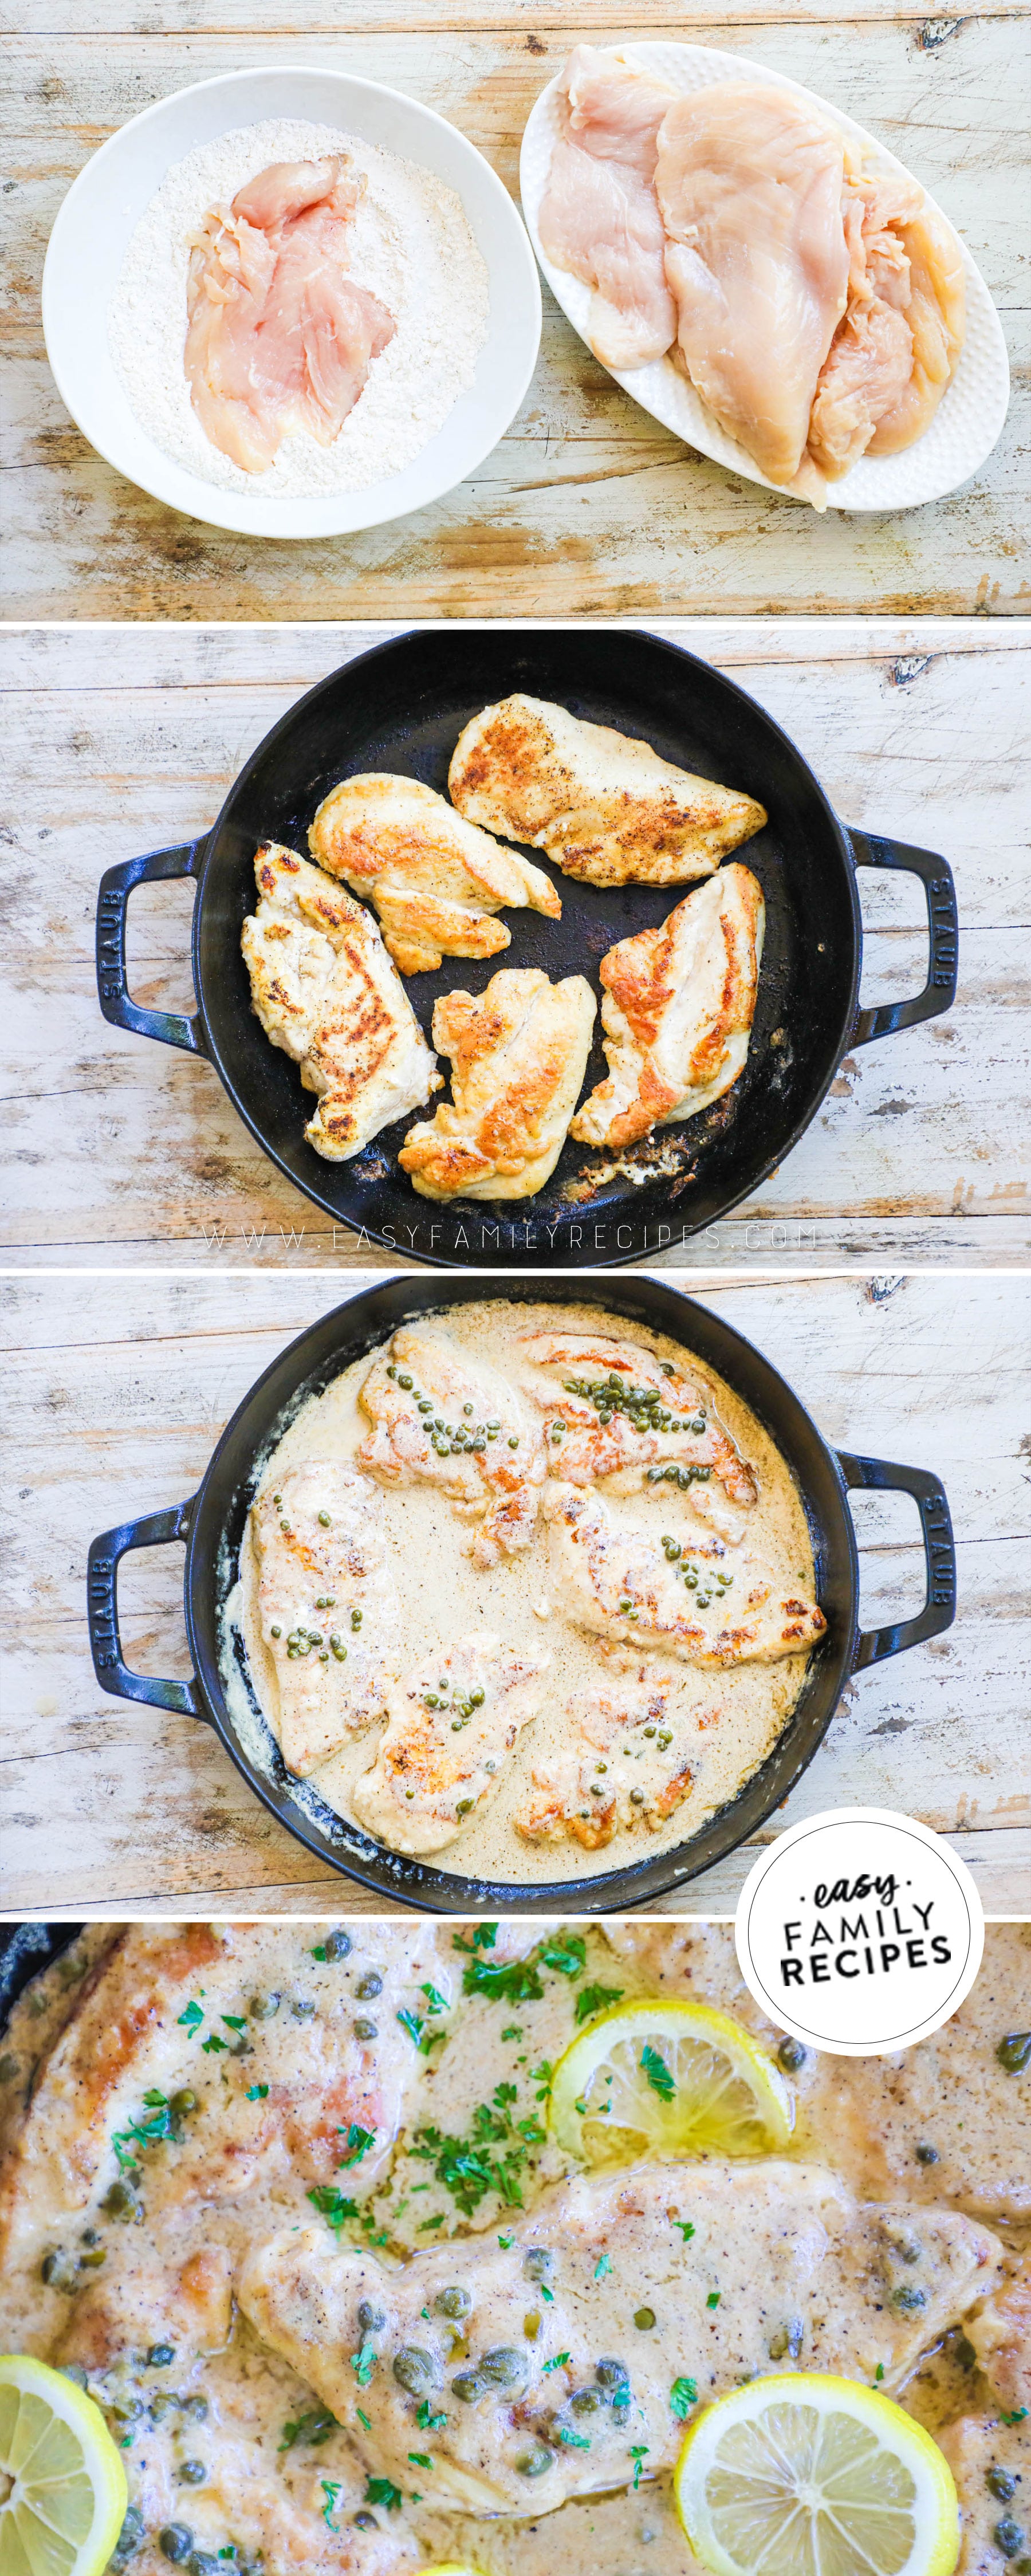 How to cook chicken piccata 1)coat chicken in seasoned flour 2)brown in a large skillet 3)Cook chicken in a creamy lemon caper sauce 4)serve